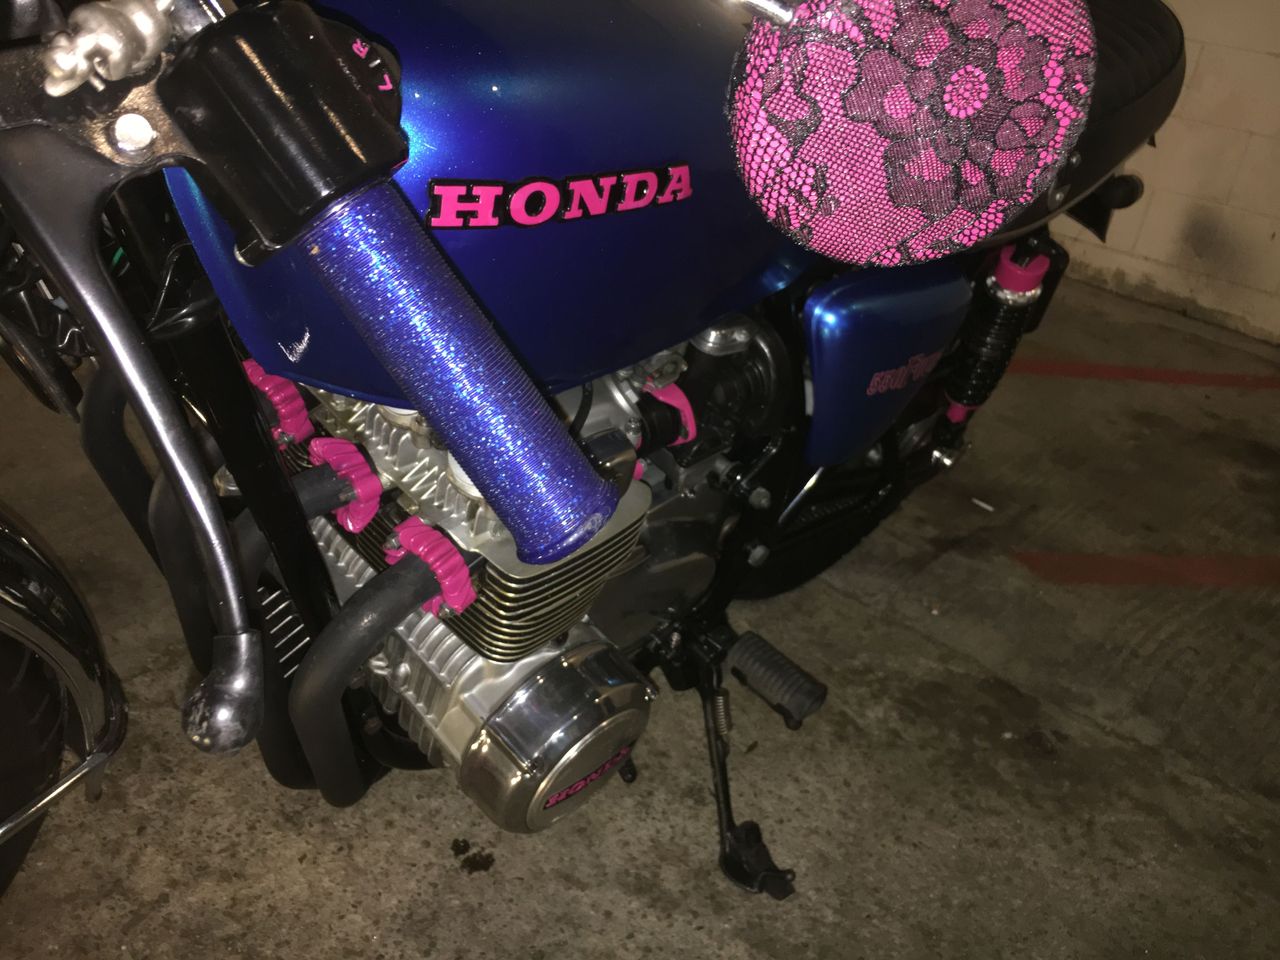 The use of pink highlights on the tank badge, exhaust phalanges. Running switches, rear suspension and carb parts, as well as the lace-clad mirrors made this bike an obvious choice for the show